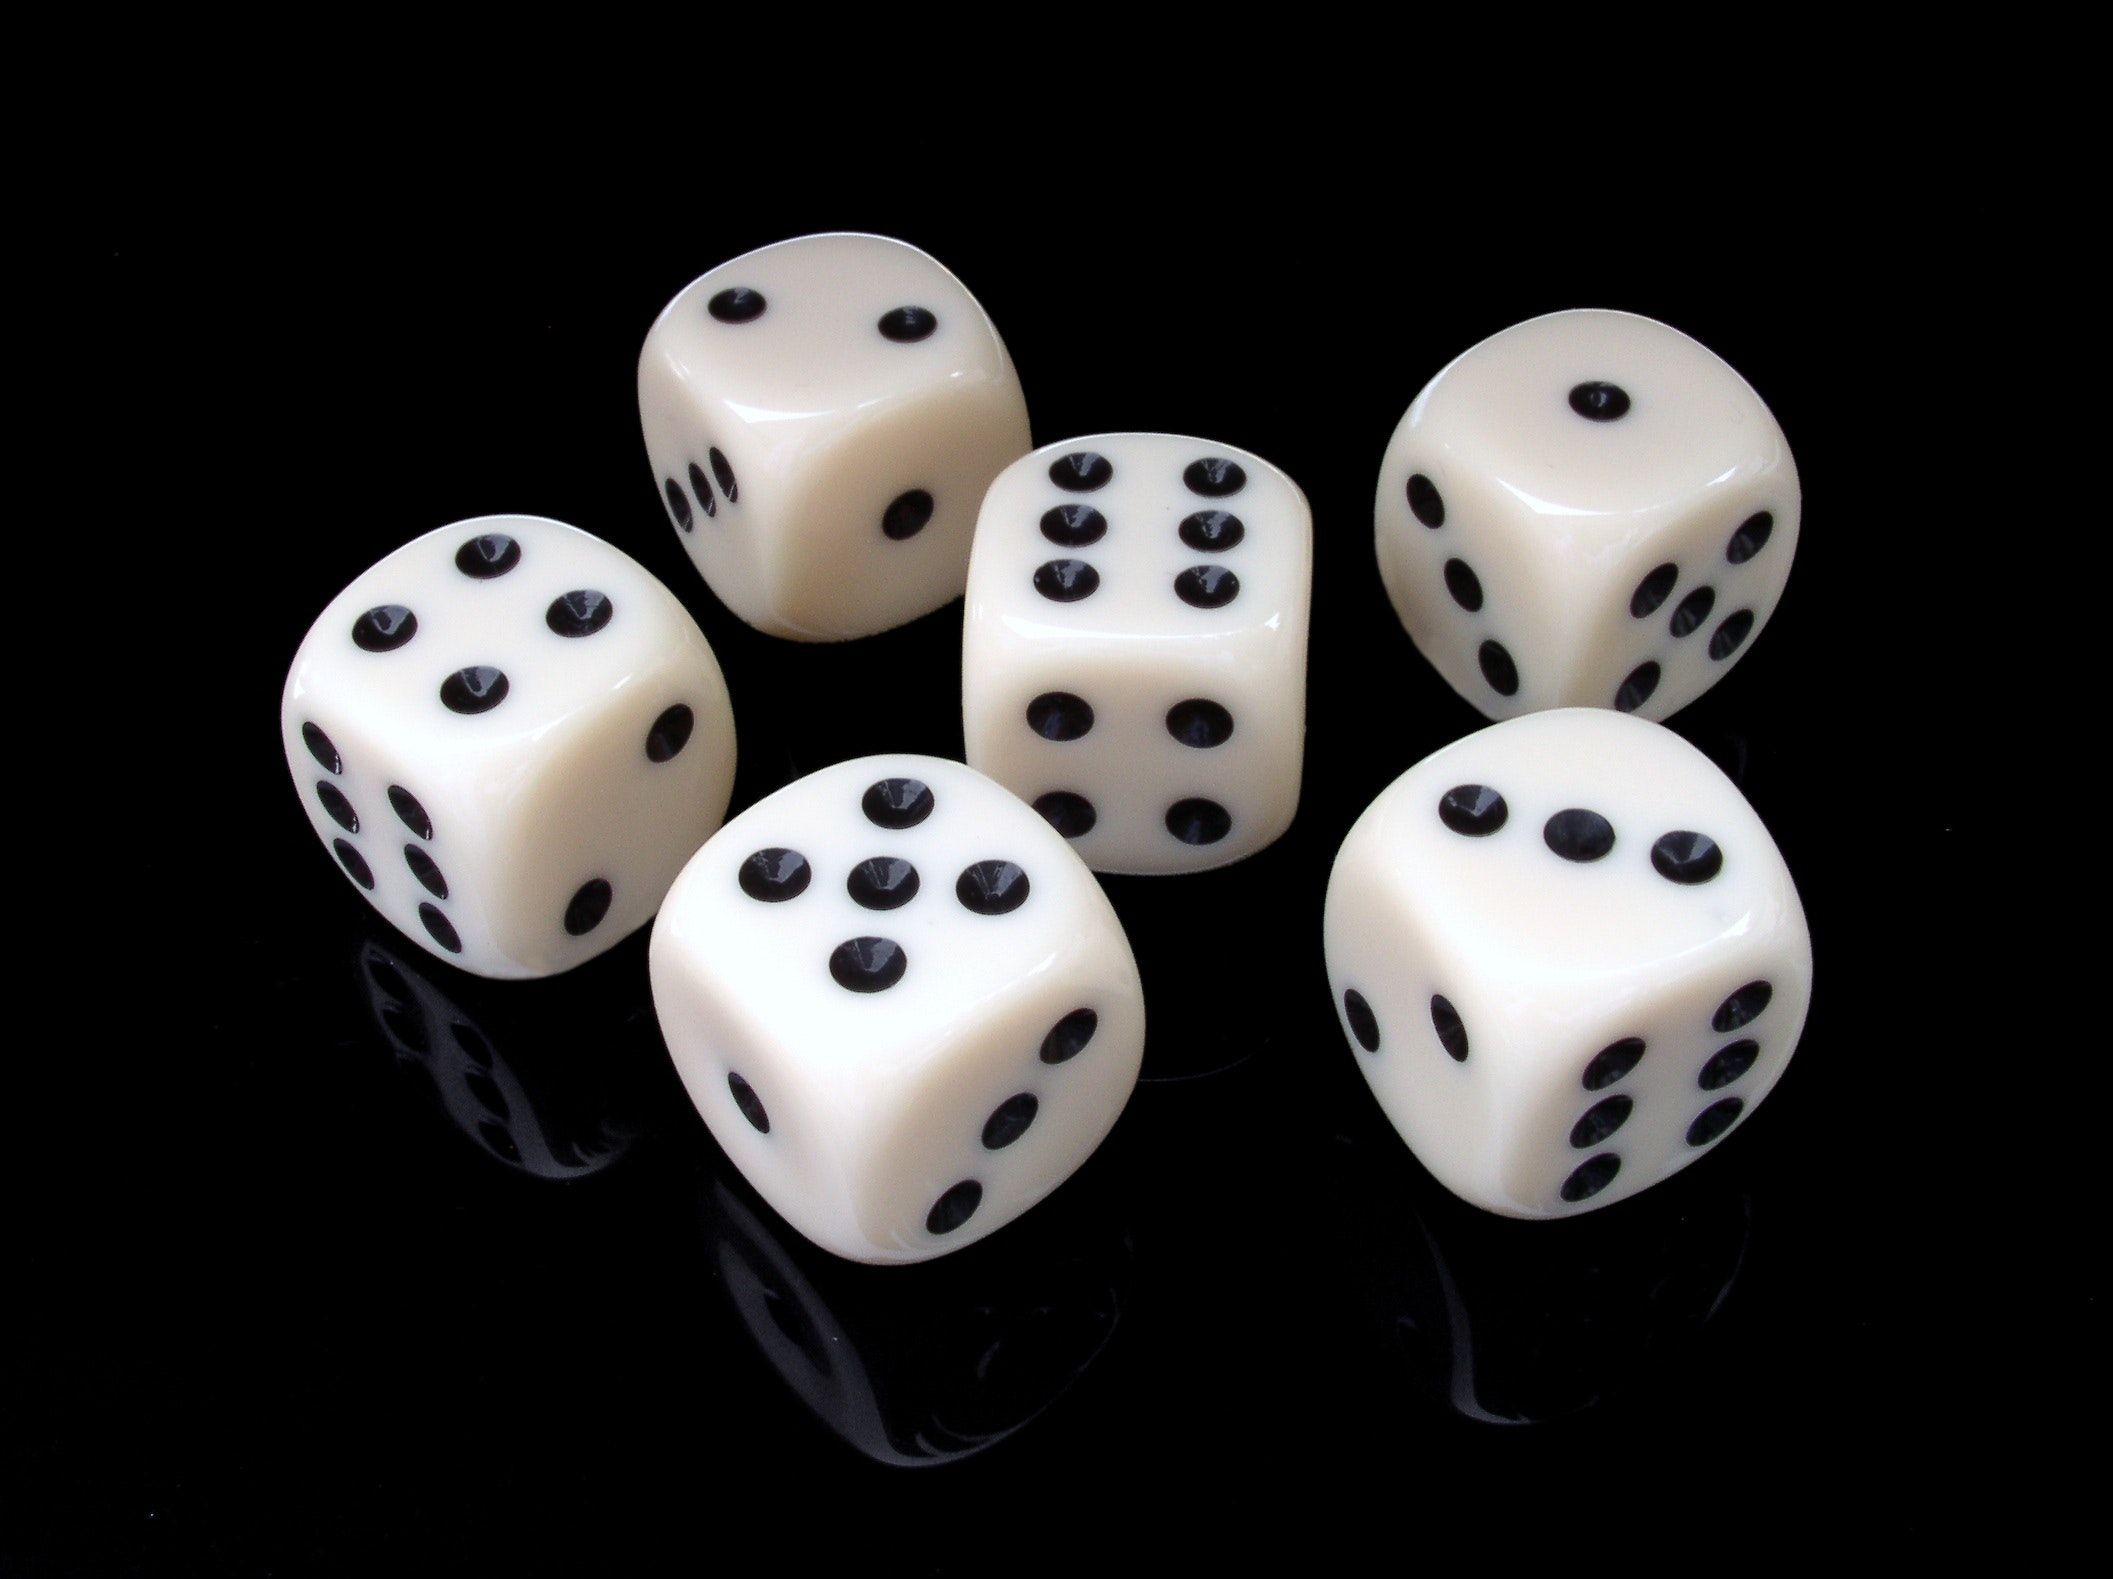 Six dice on a table.